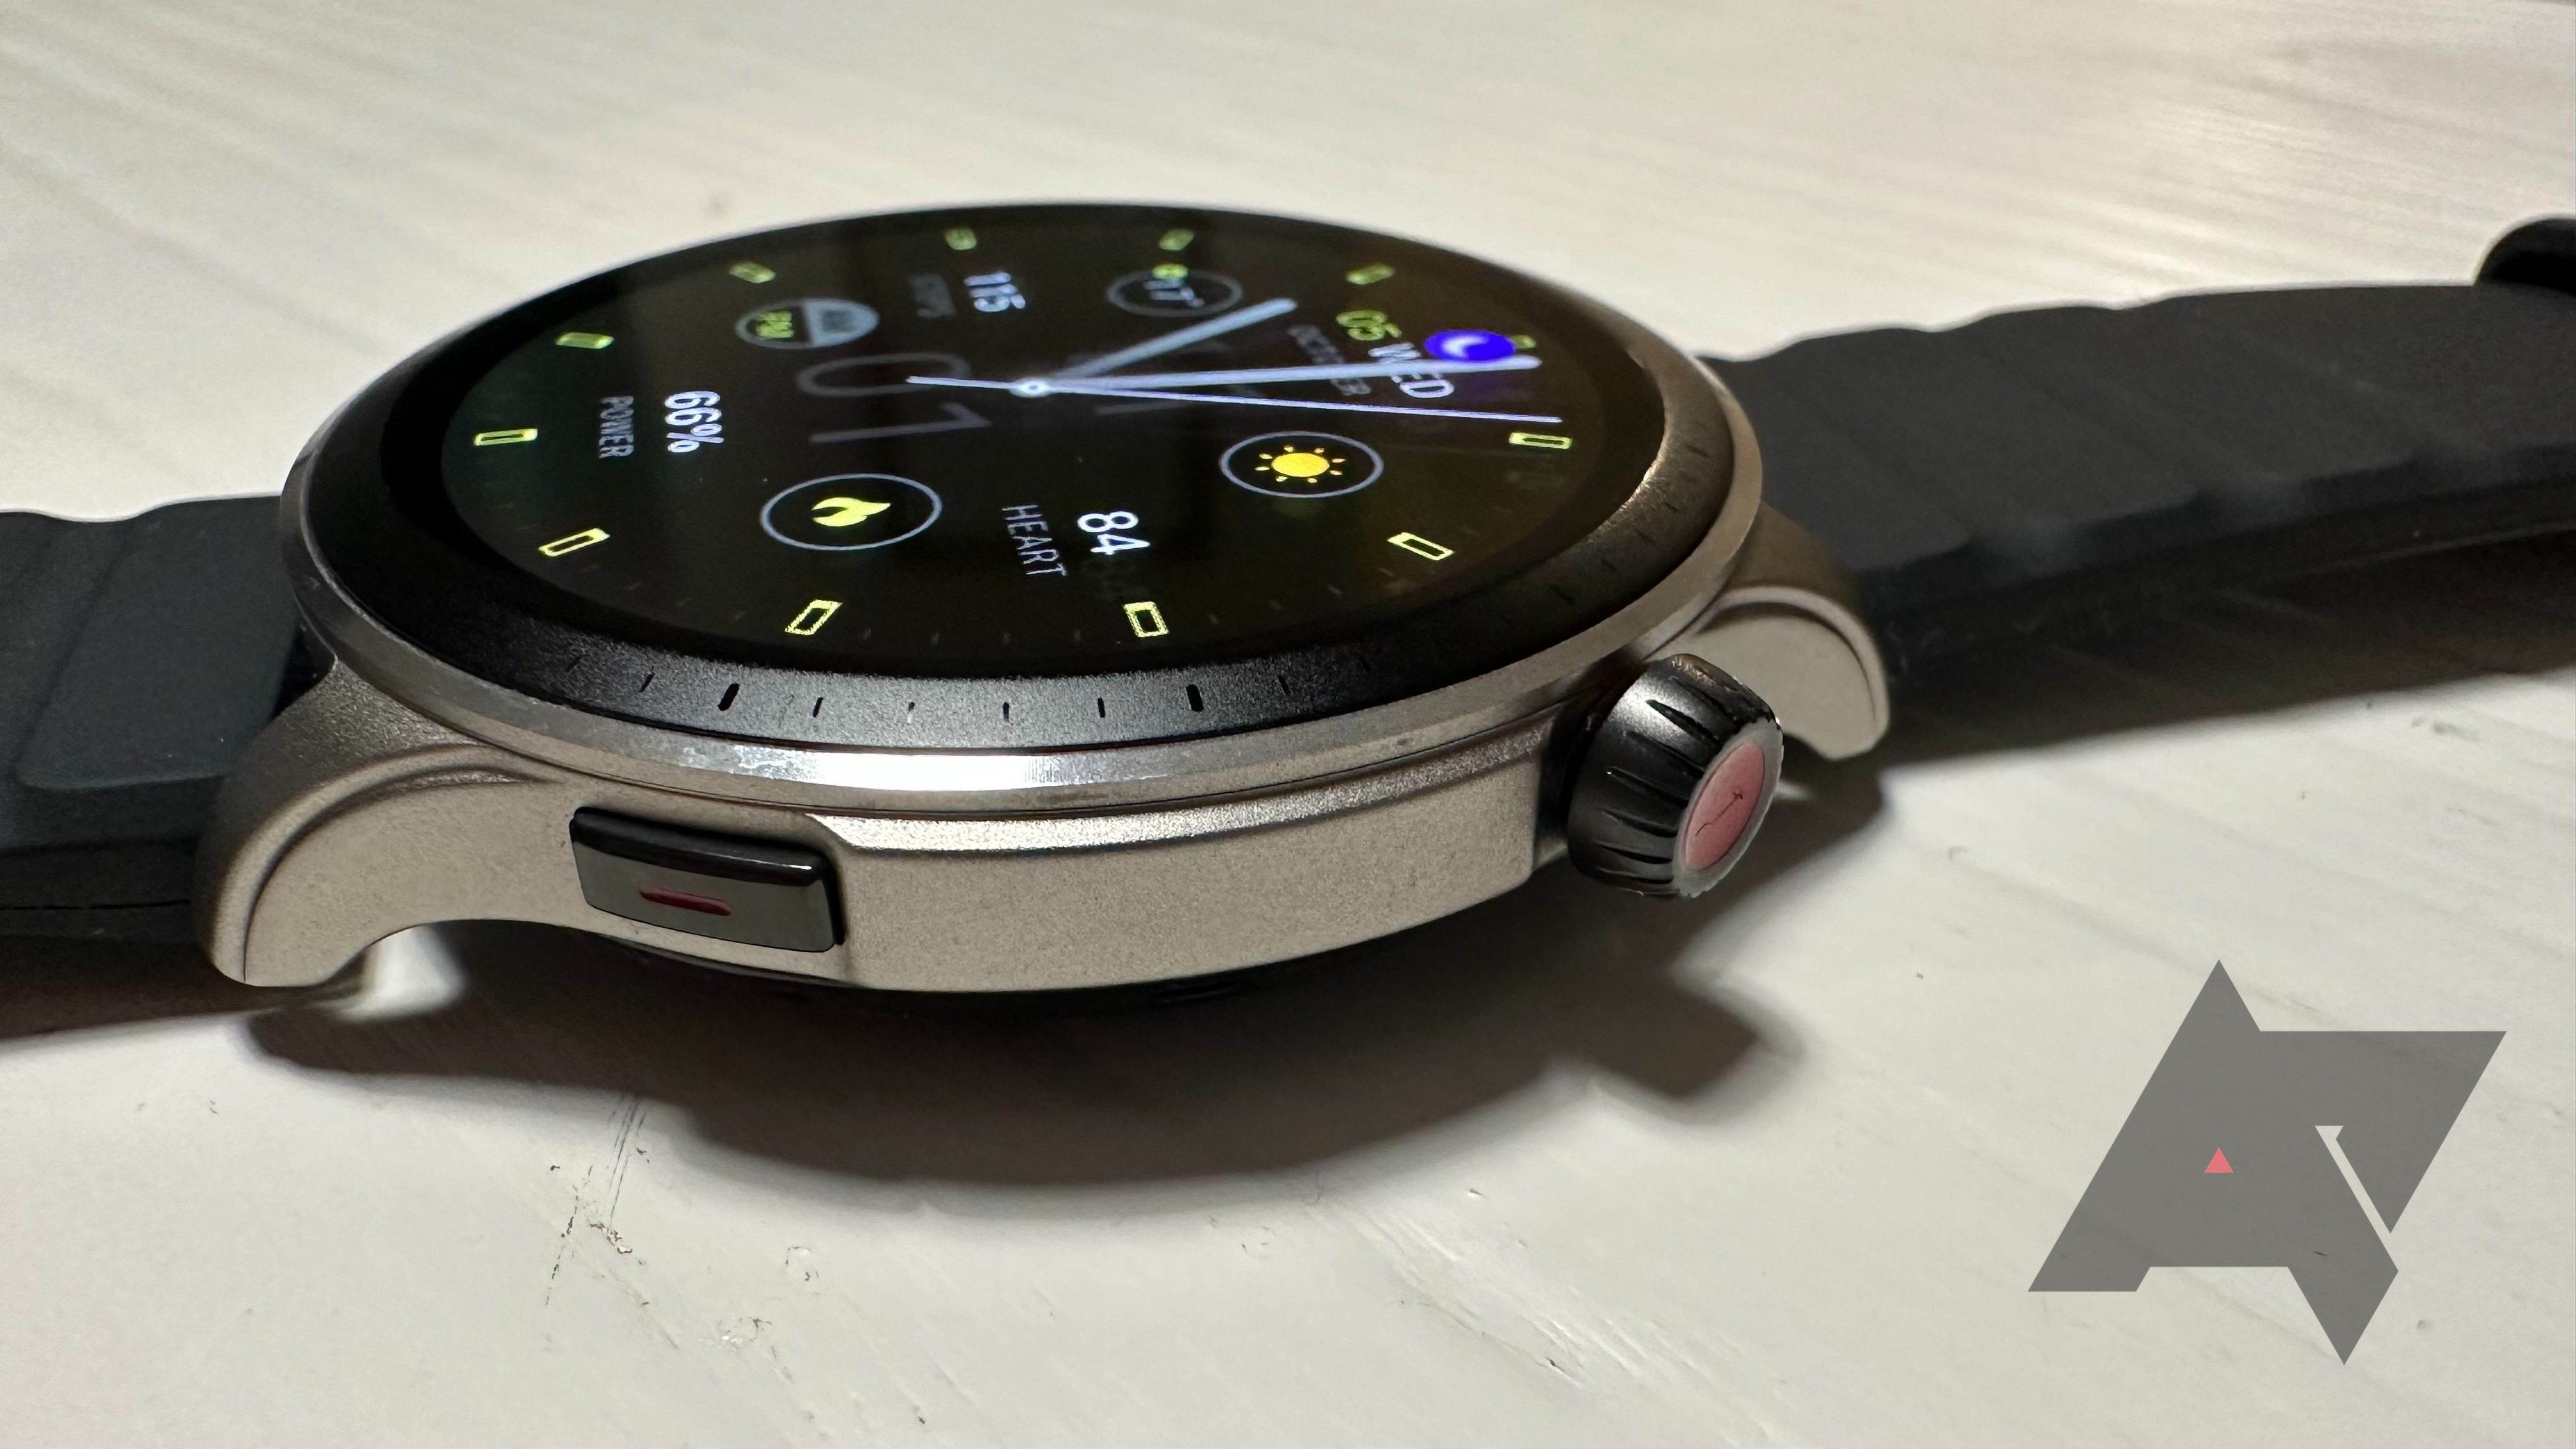 Amazfit's GTR 4 smartwatch, the side buttons